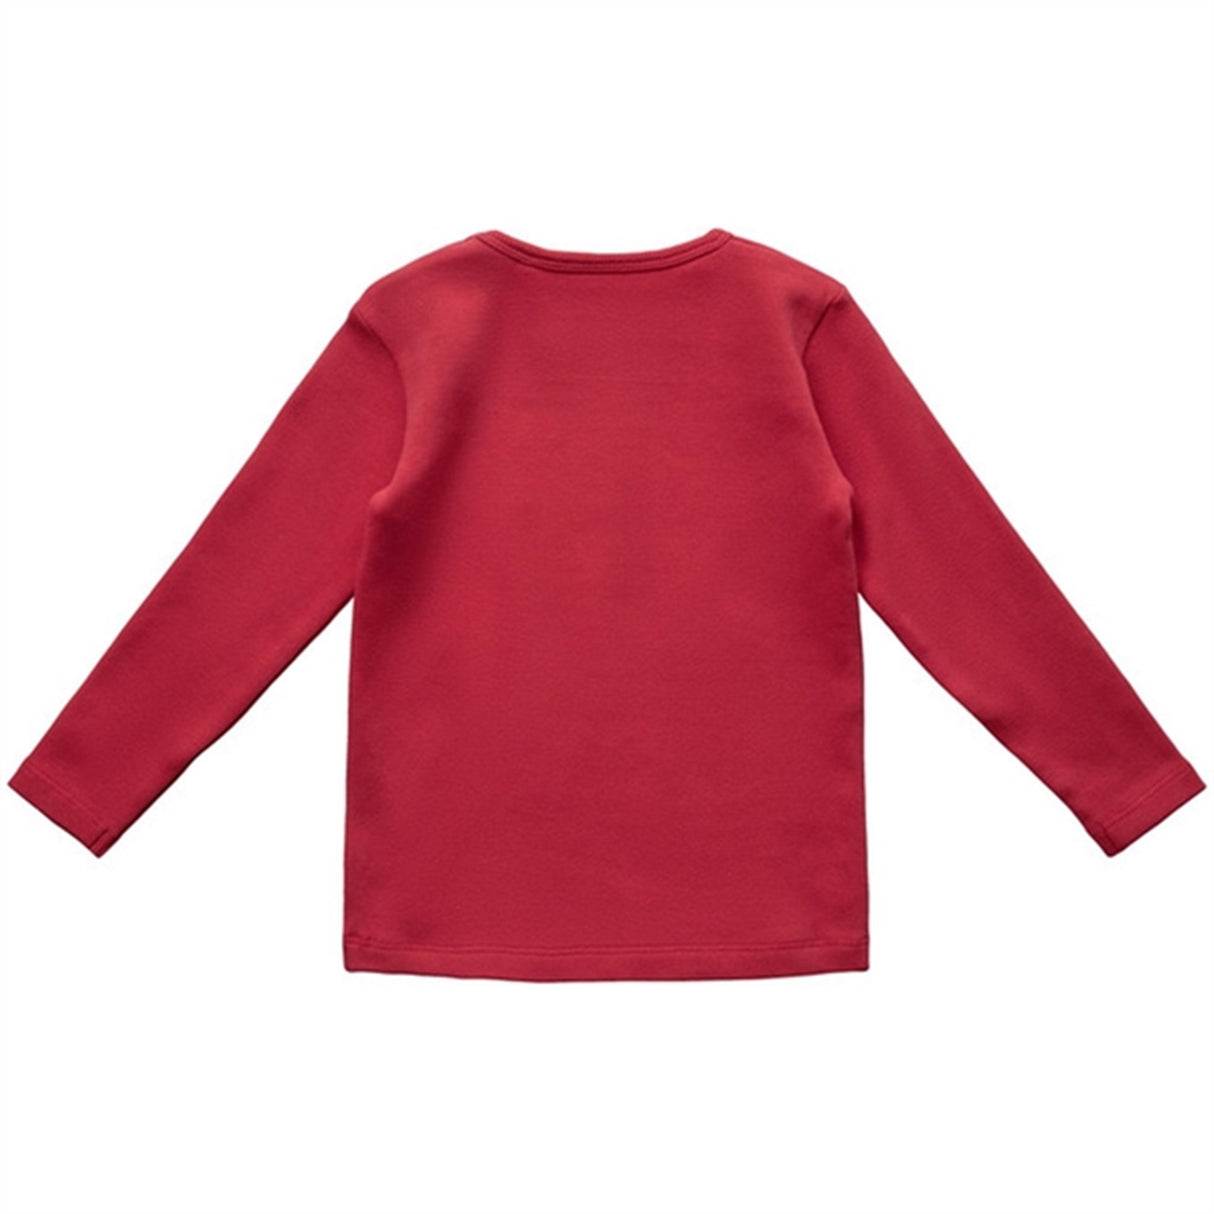 Sofie Schnoor Berry Red Blouse 3